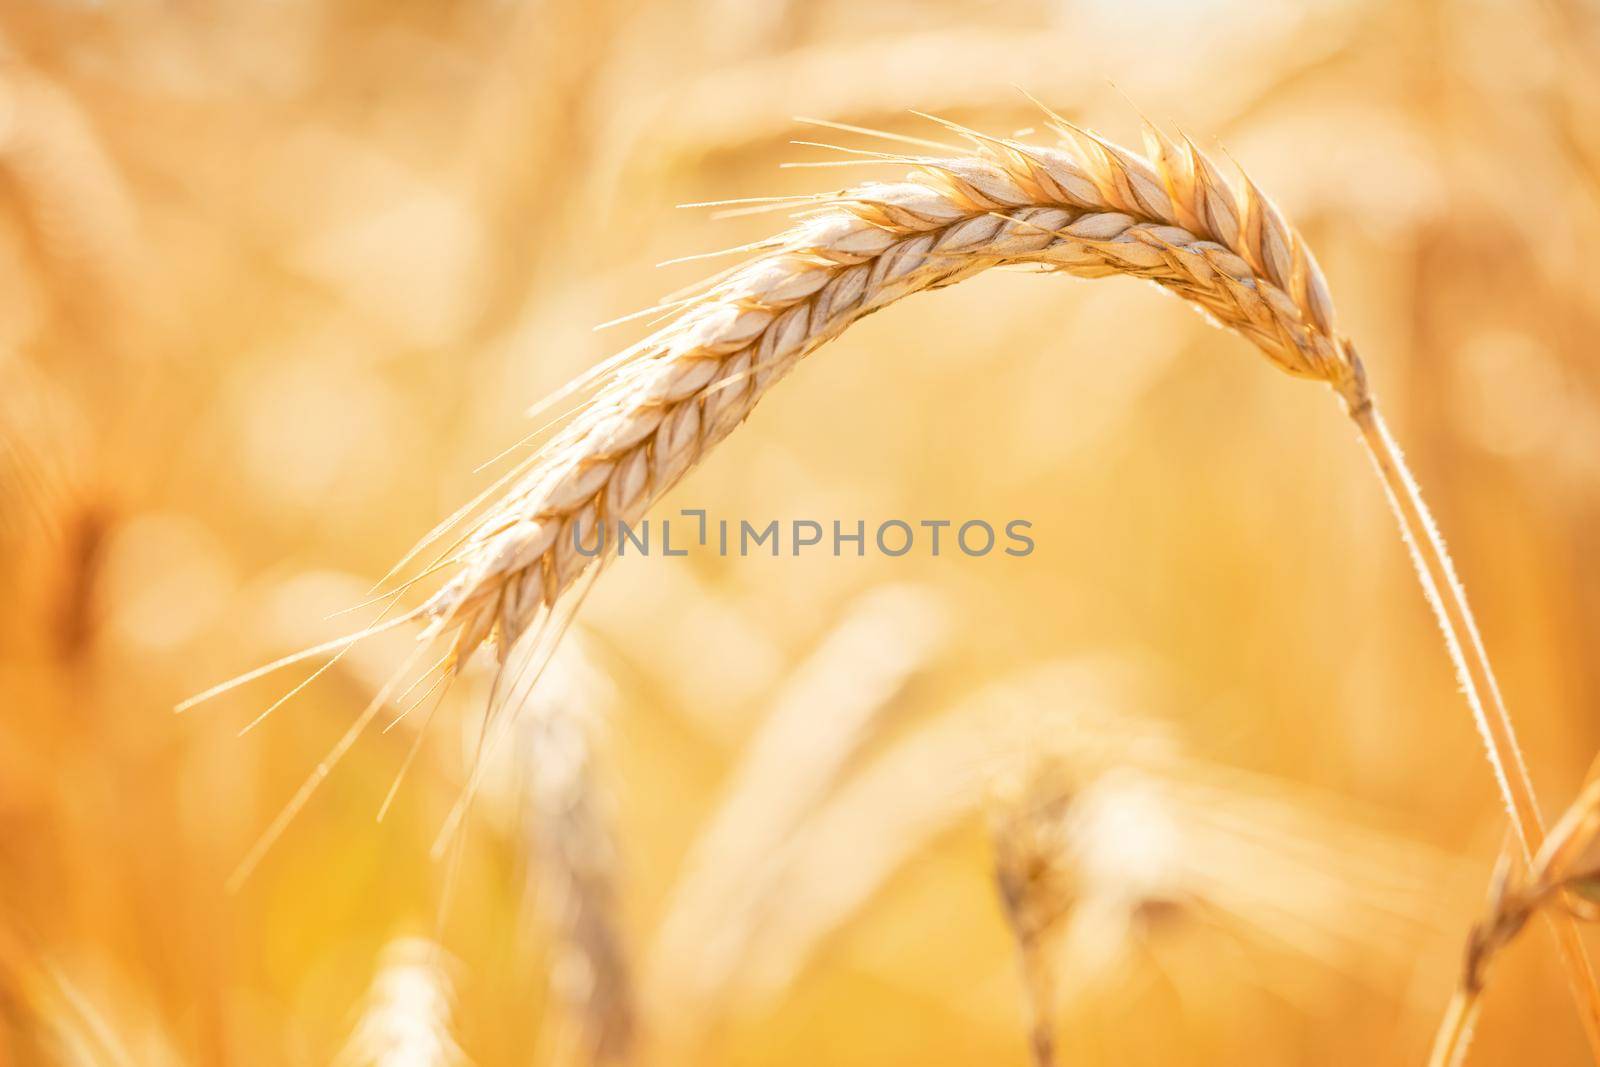 Golden ripe ears of wheat close up. Ripening wheat spikelets in rural meadow closeup. Rich harvest concept.